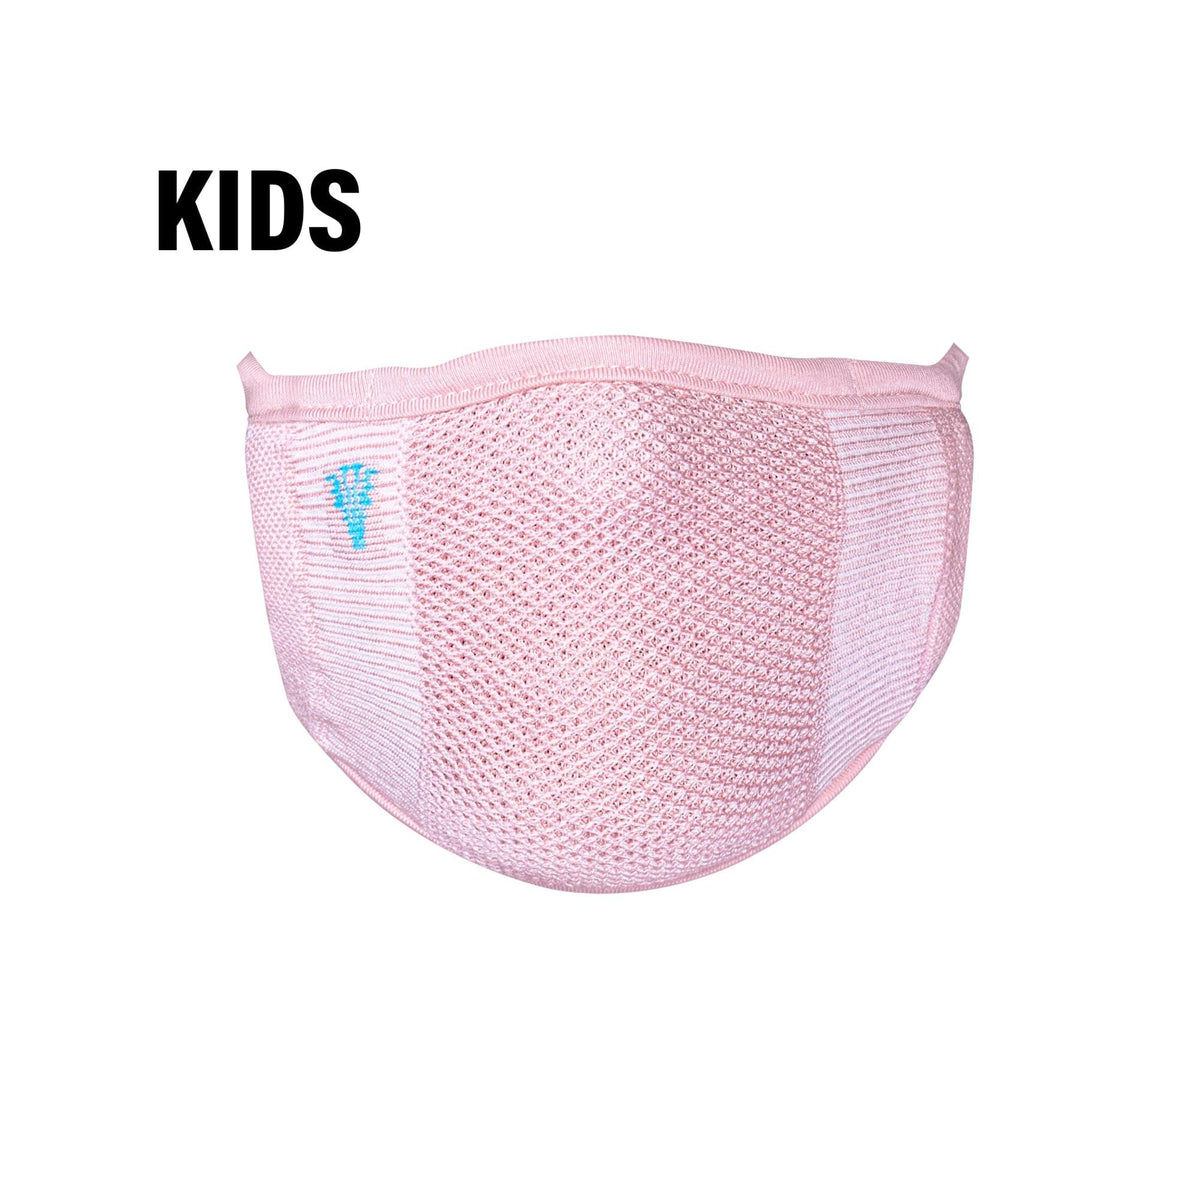 2-Layer Anti-Bacterial Protection Mask for Kids, Fashion Coloured -Size - Medium (8-12 Yrs) - Pack of 1